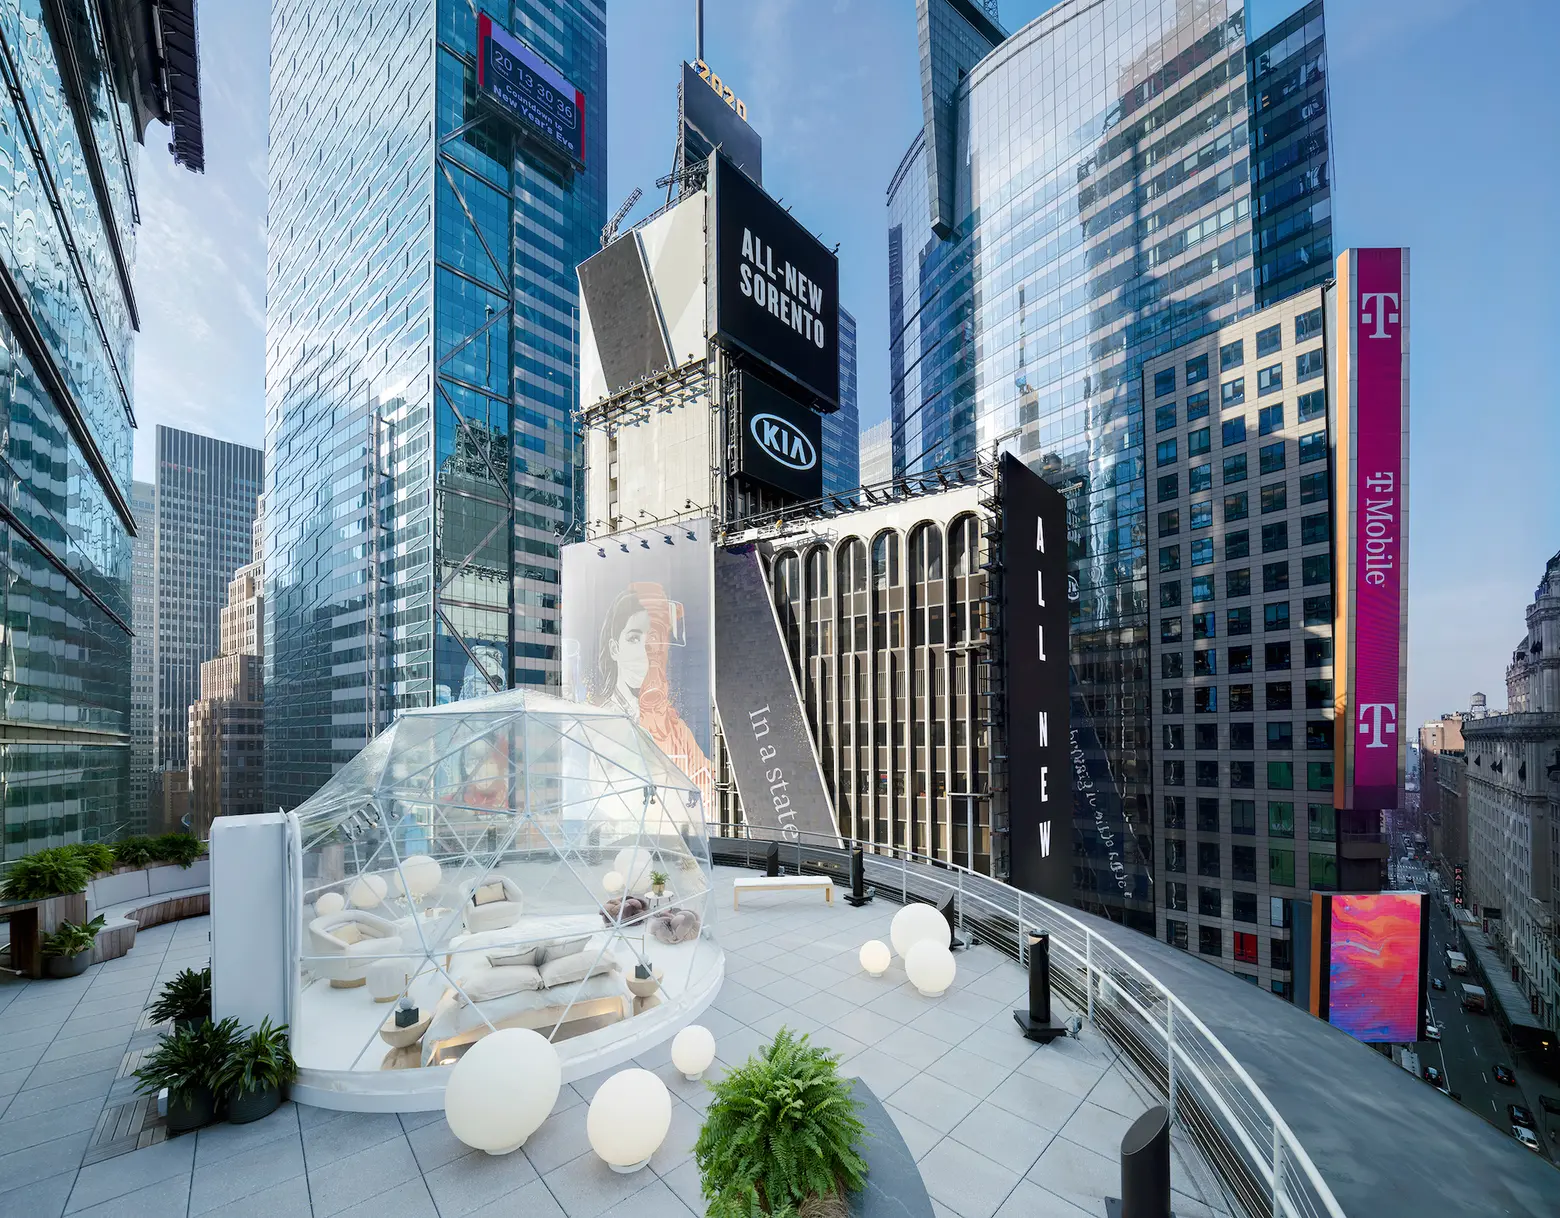 On New Year’s Eve, you can sleep in a private igloo under the Times Square Ball